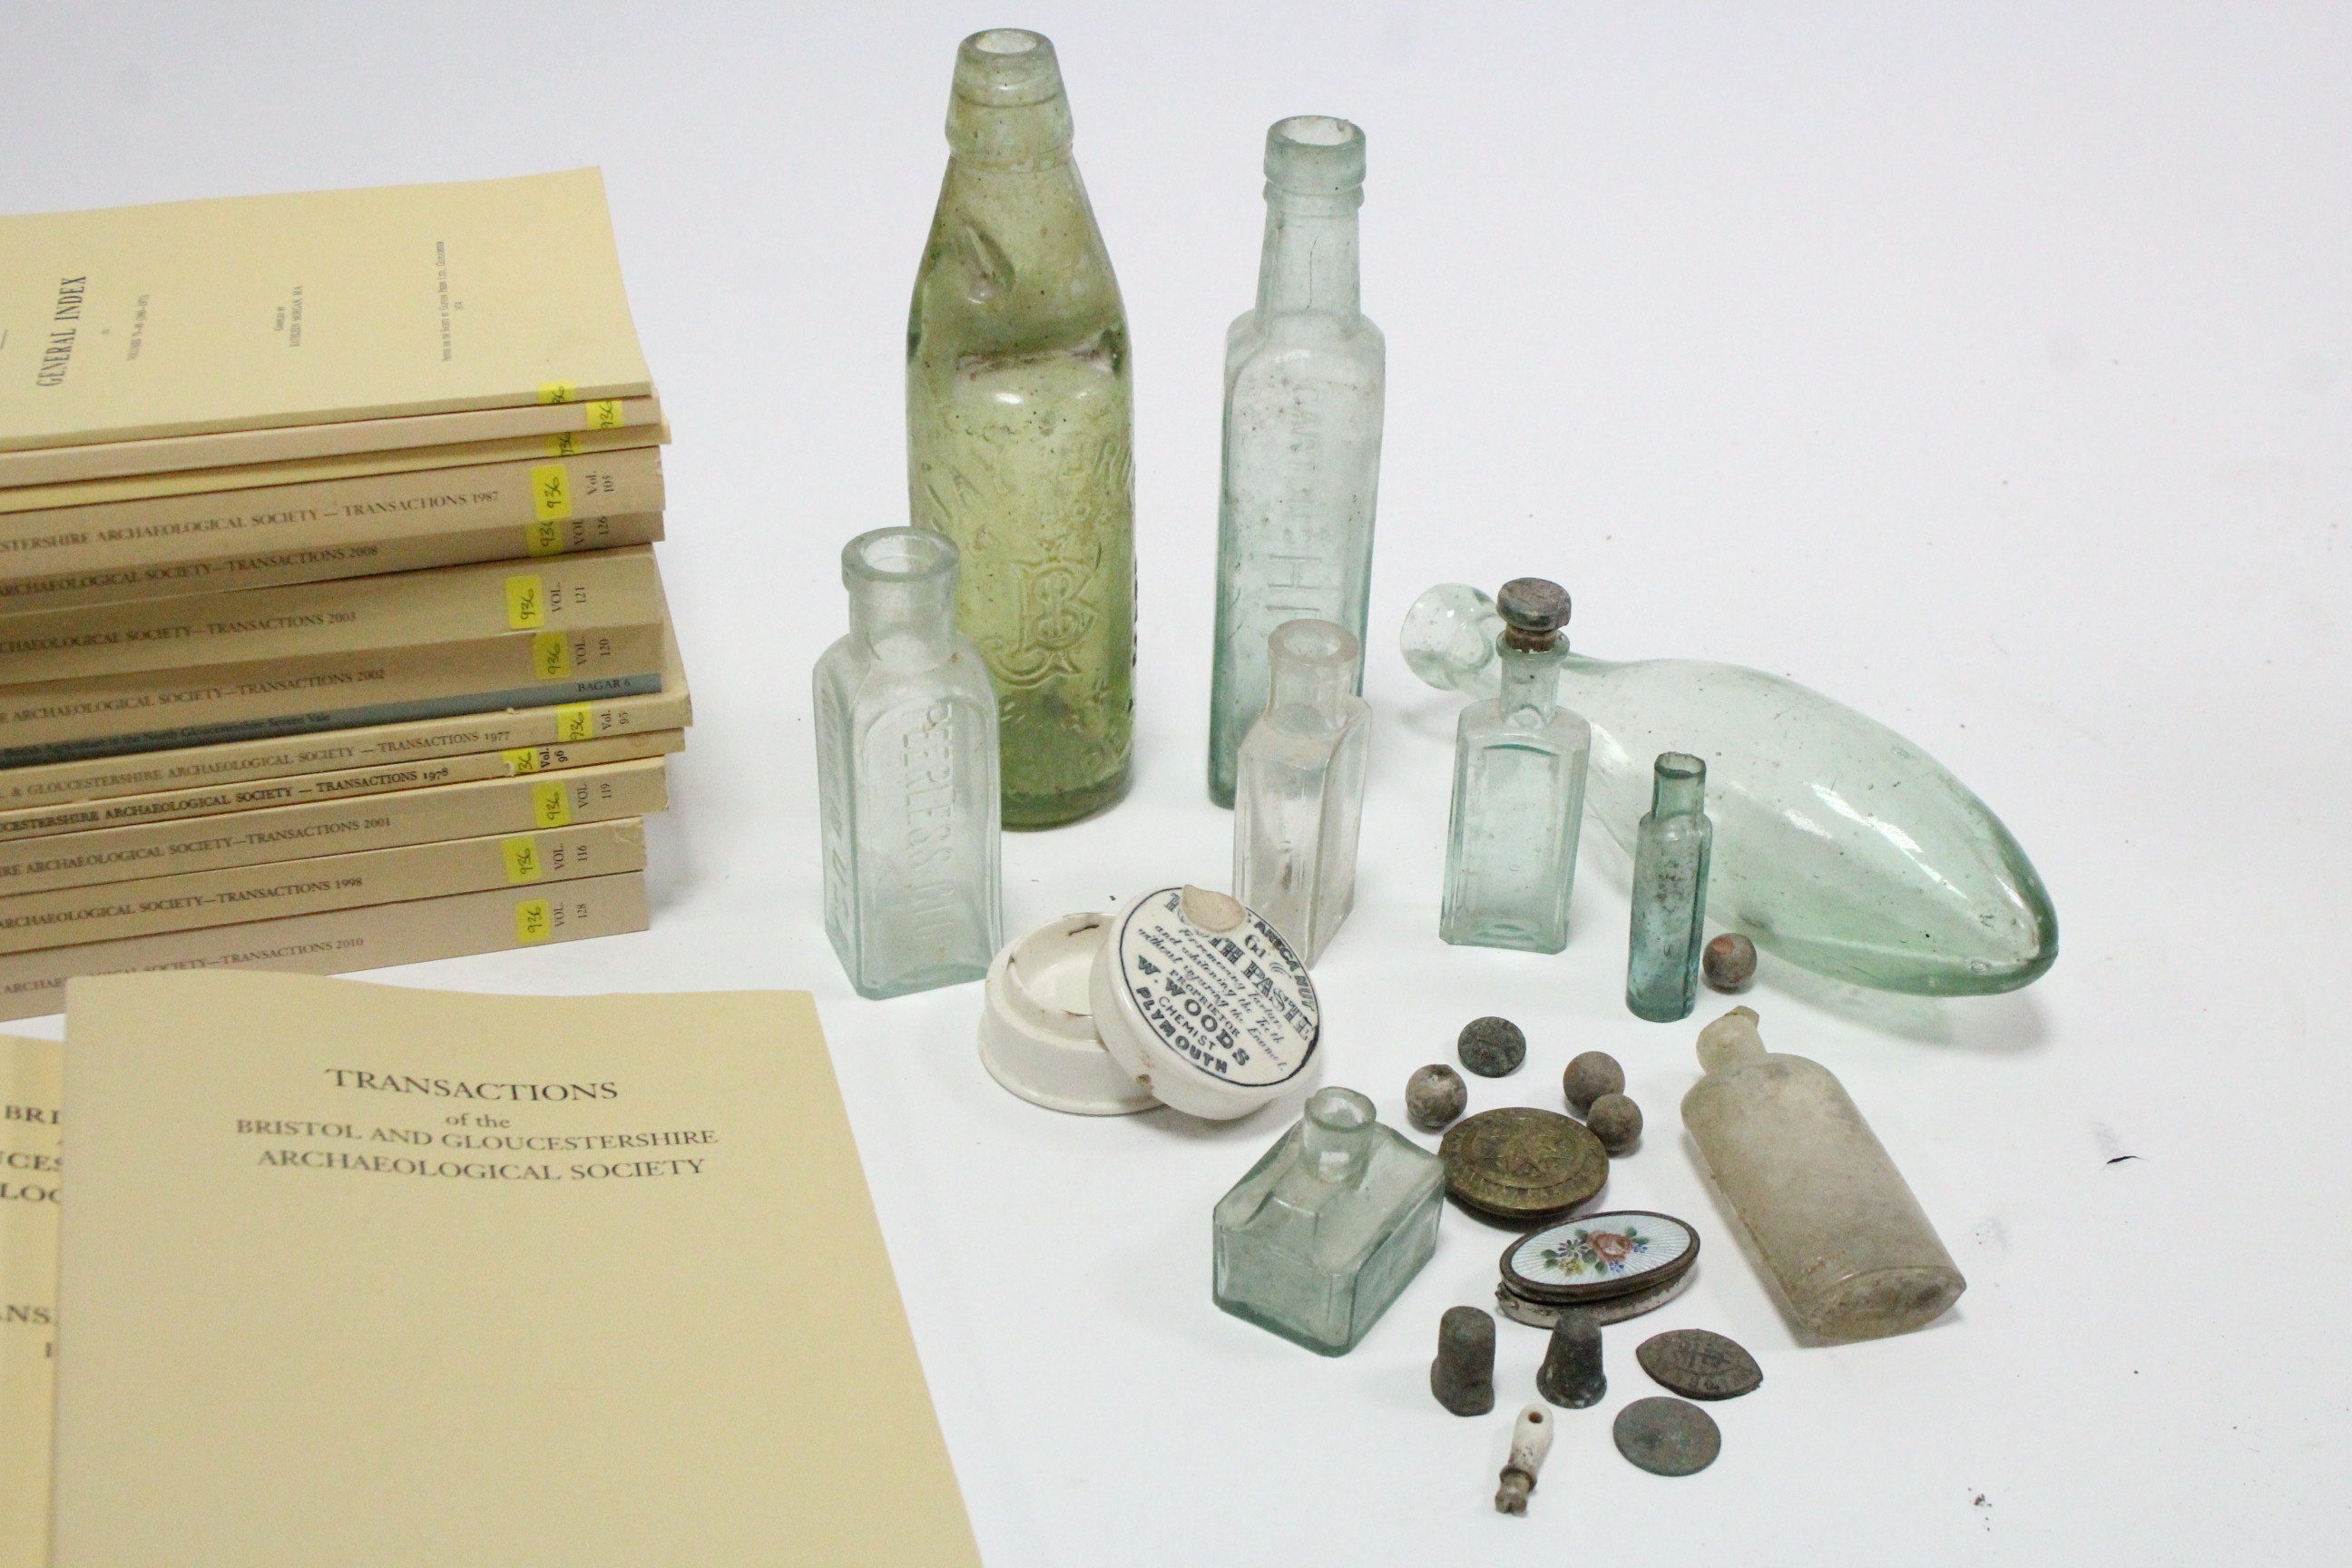 Twenty-three archaeological society volumes; & various archaeological finds. - Image 4 of 5